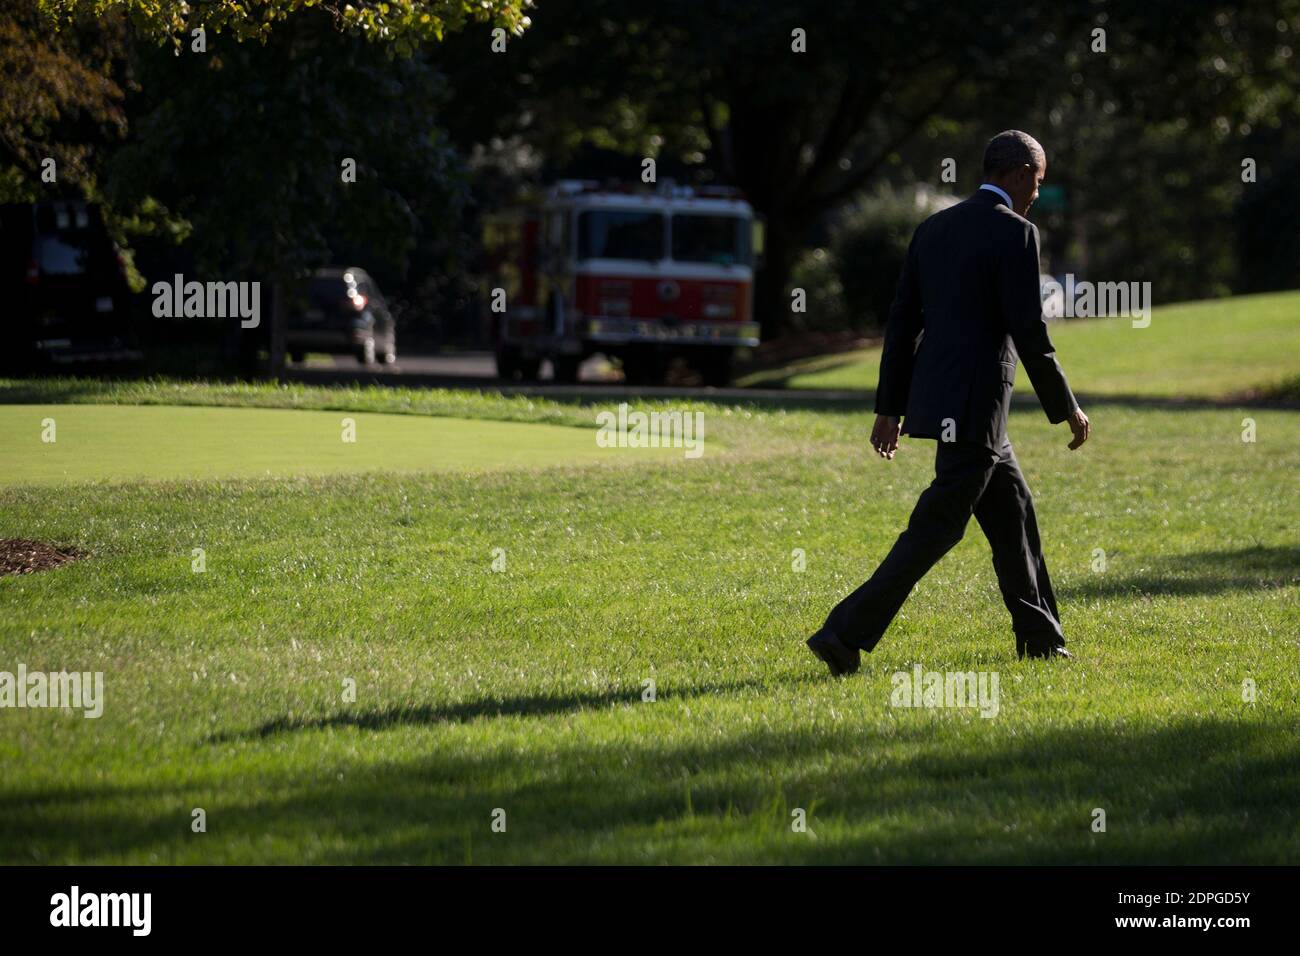 U.S. President Barack Obama walks toward the White House after landing on the South Lawn in Washington, DC, USA, on Tuesday, August 25. Obama pledged yesterday to provide incentives to support investments in renewable energy, saying the industry will thrive despite opposition by Republicans and fossil-fuel suppliers. Photo by Andrew Harrer/Pool/ABACAPRESS.COM Stock Photo